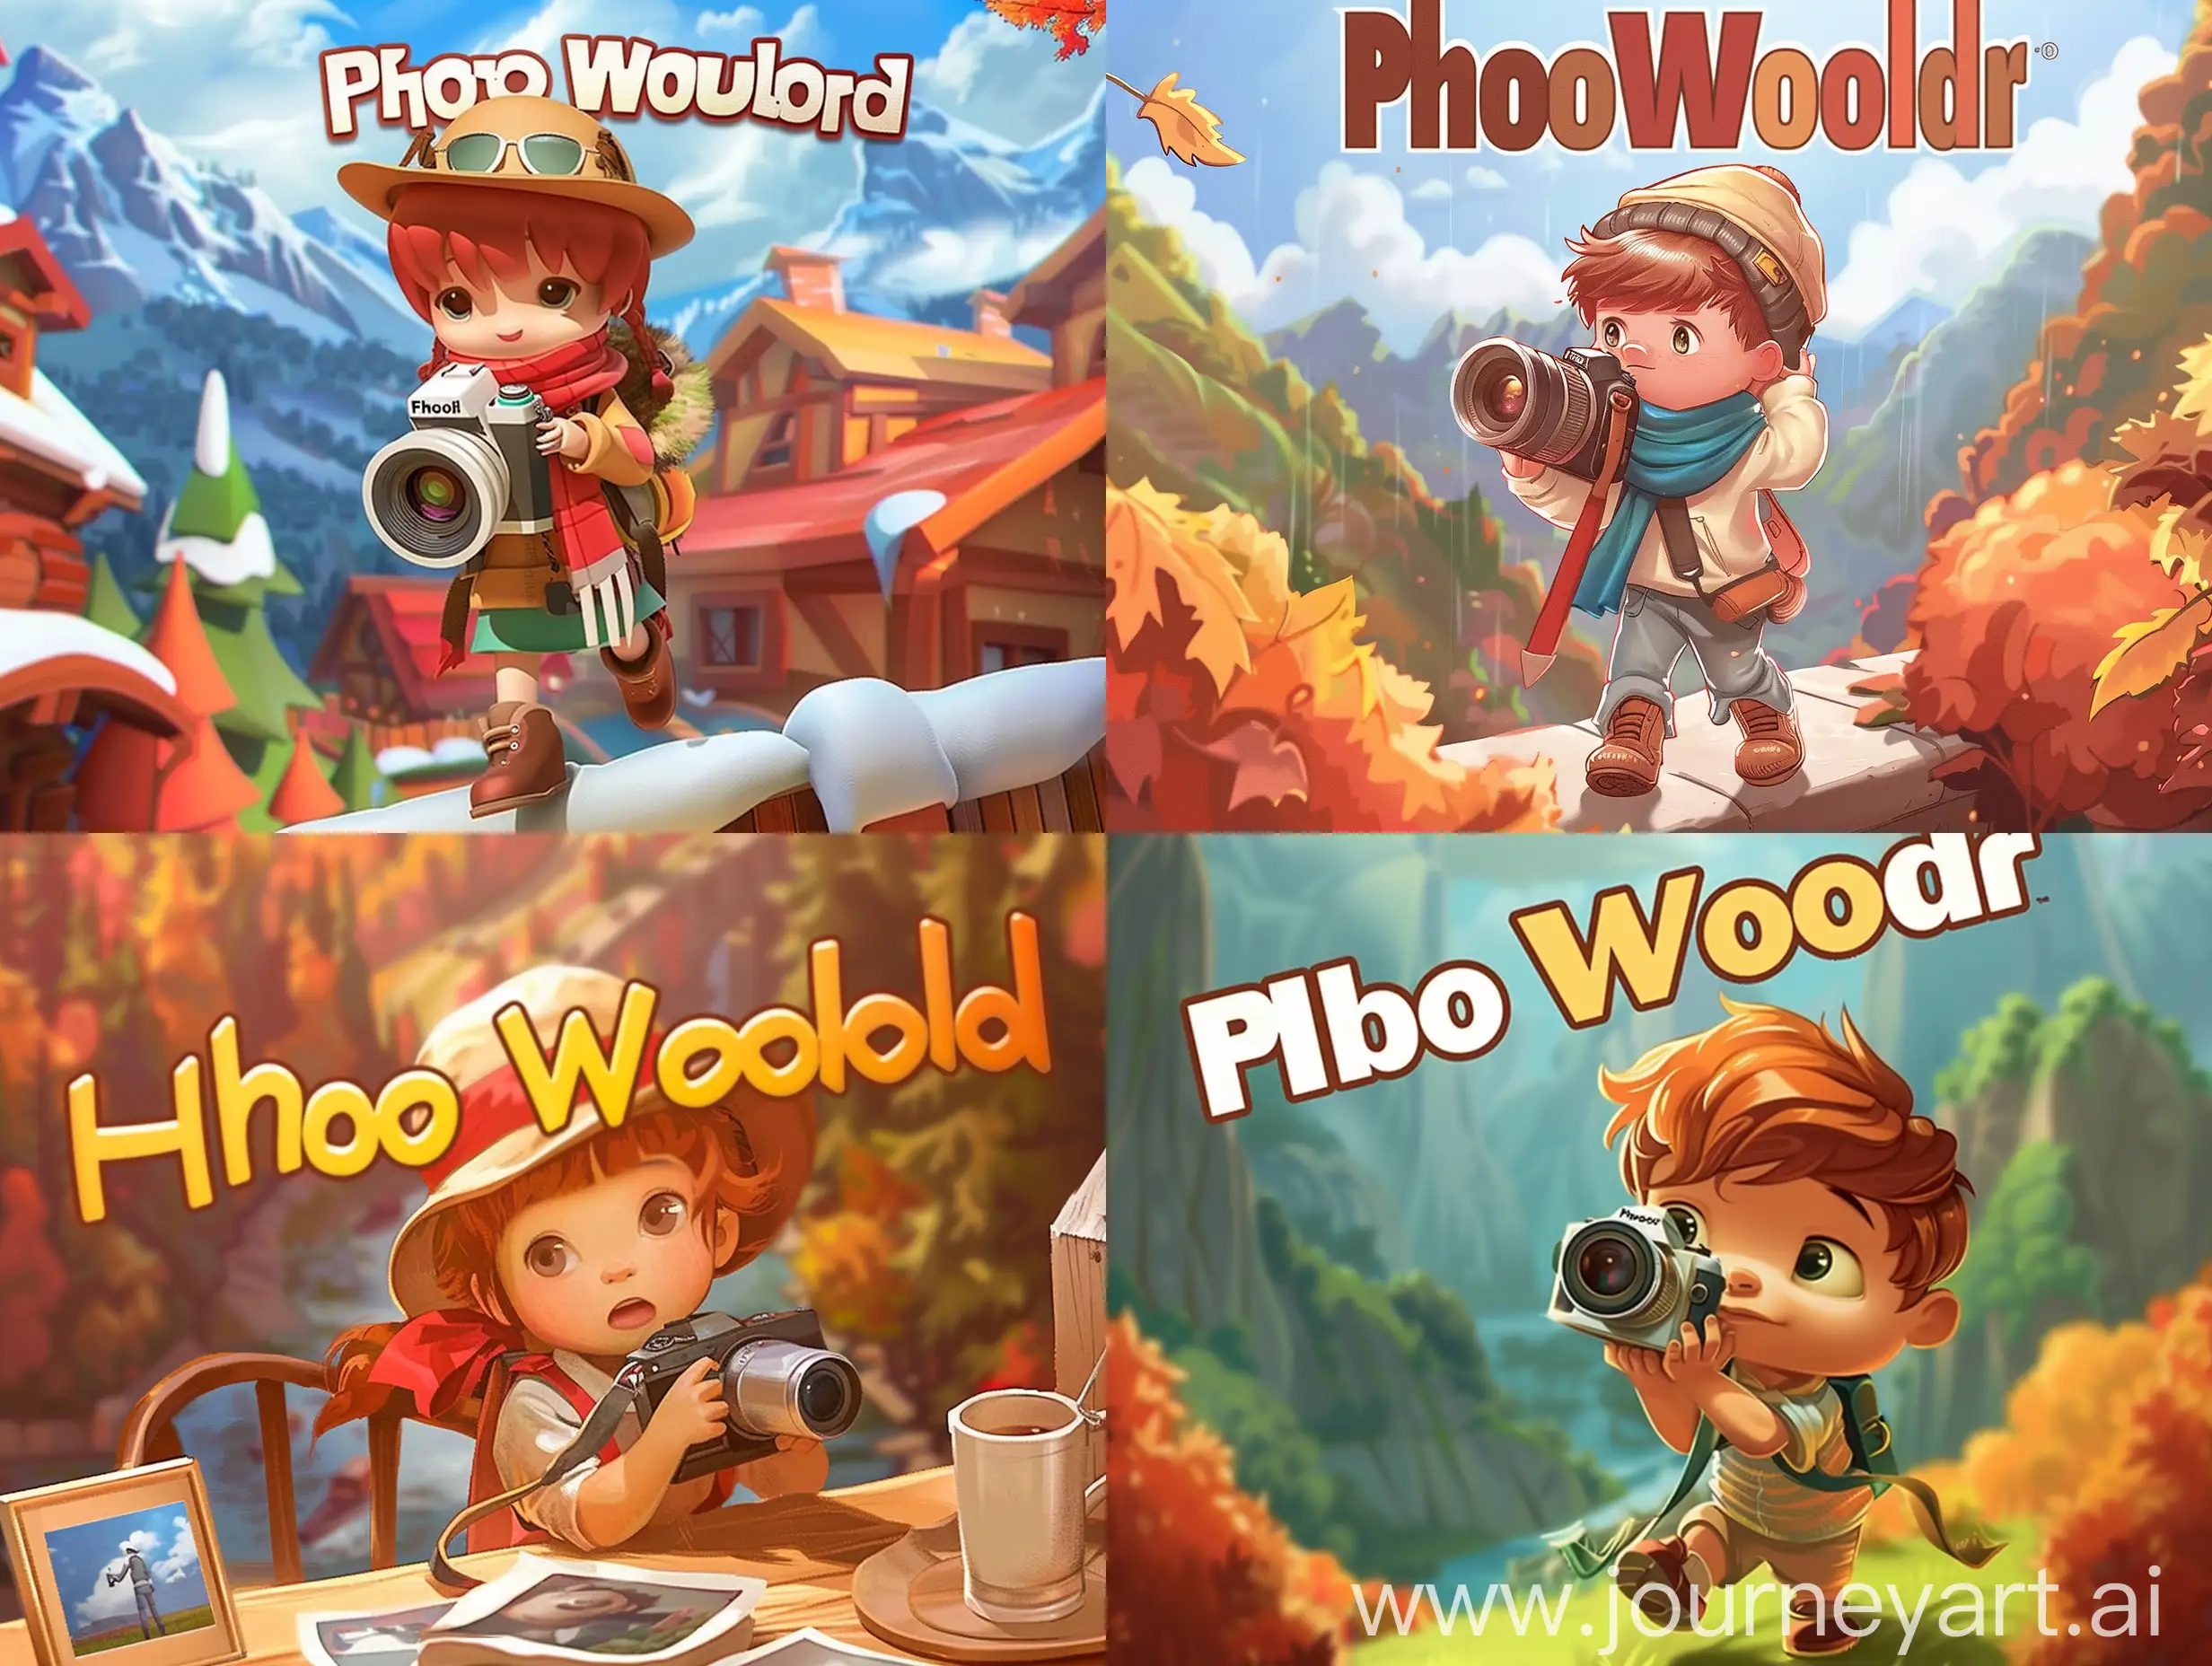 Adorable-PhotoWorld-Game-Cover-with-Photographer-and-Camera